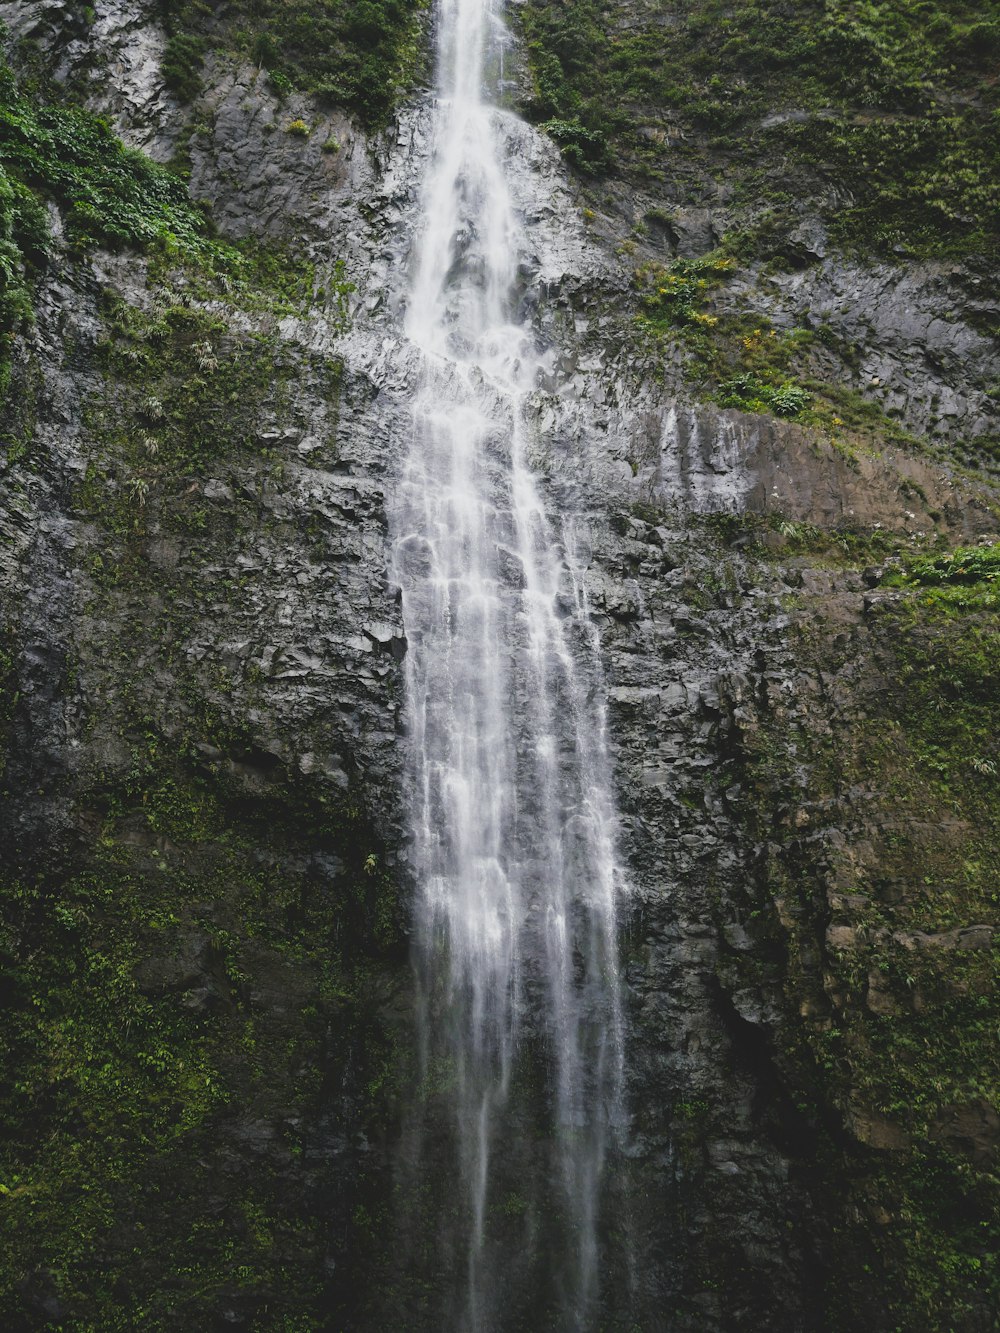 a tall waterfall with lots of water coming out of it